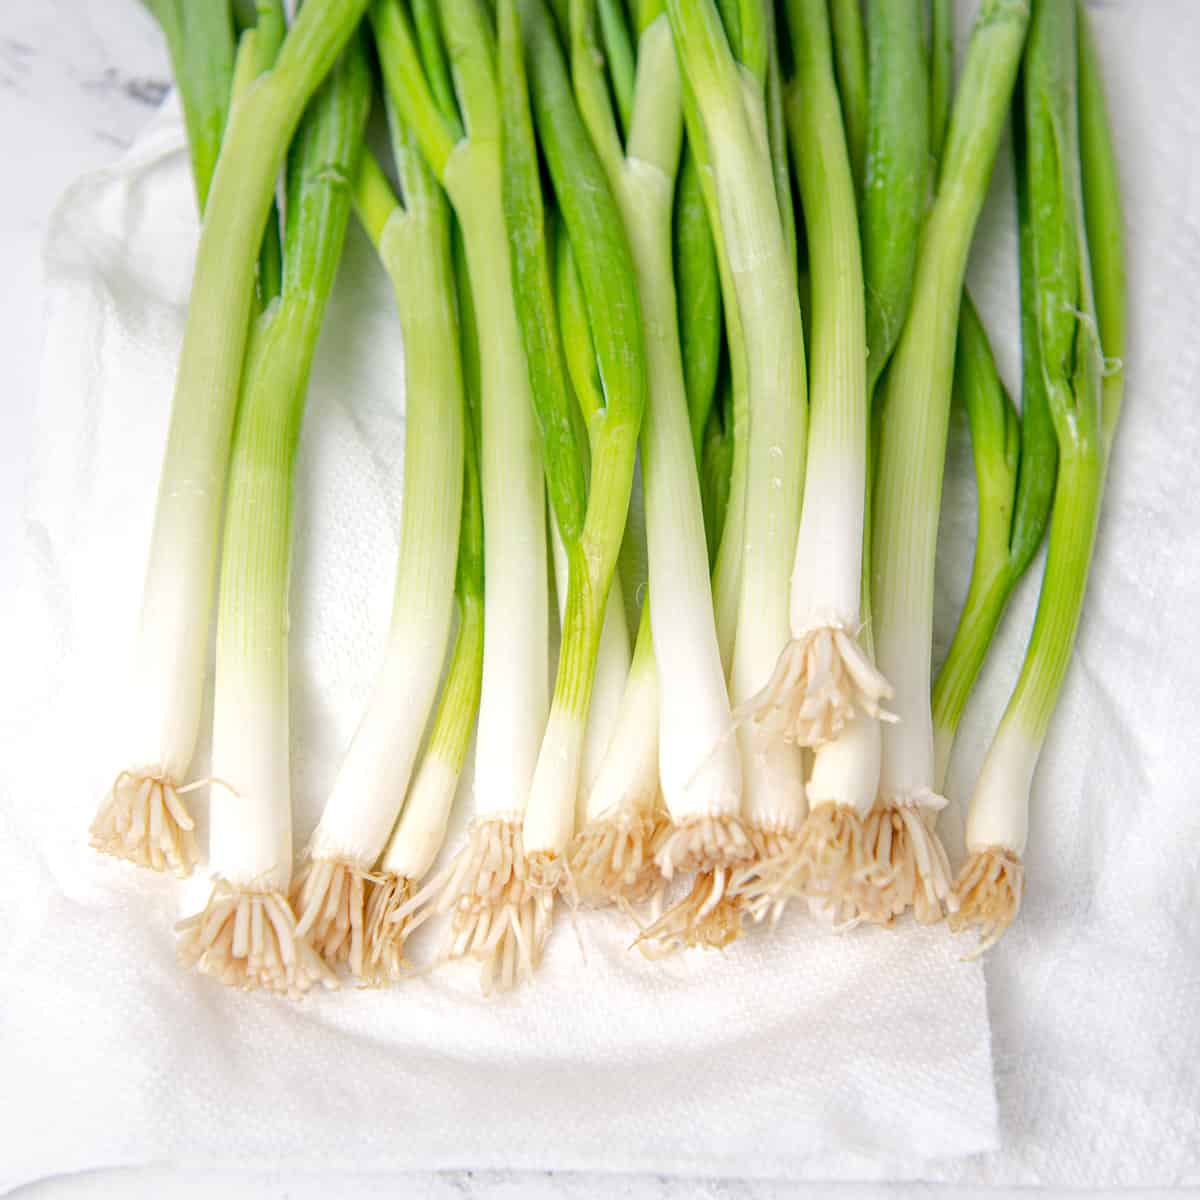 Top view of scallions on a white kitchen towel.